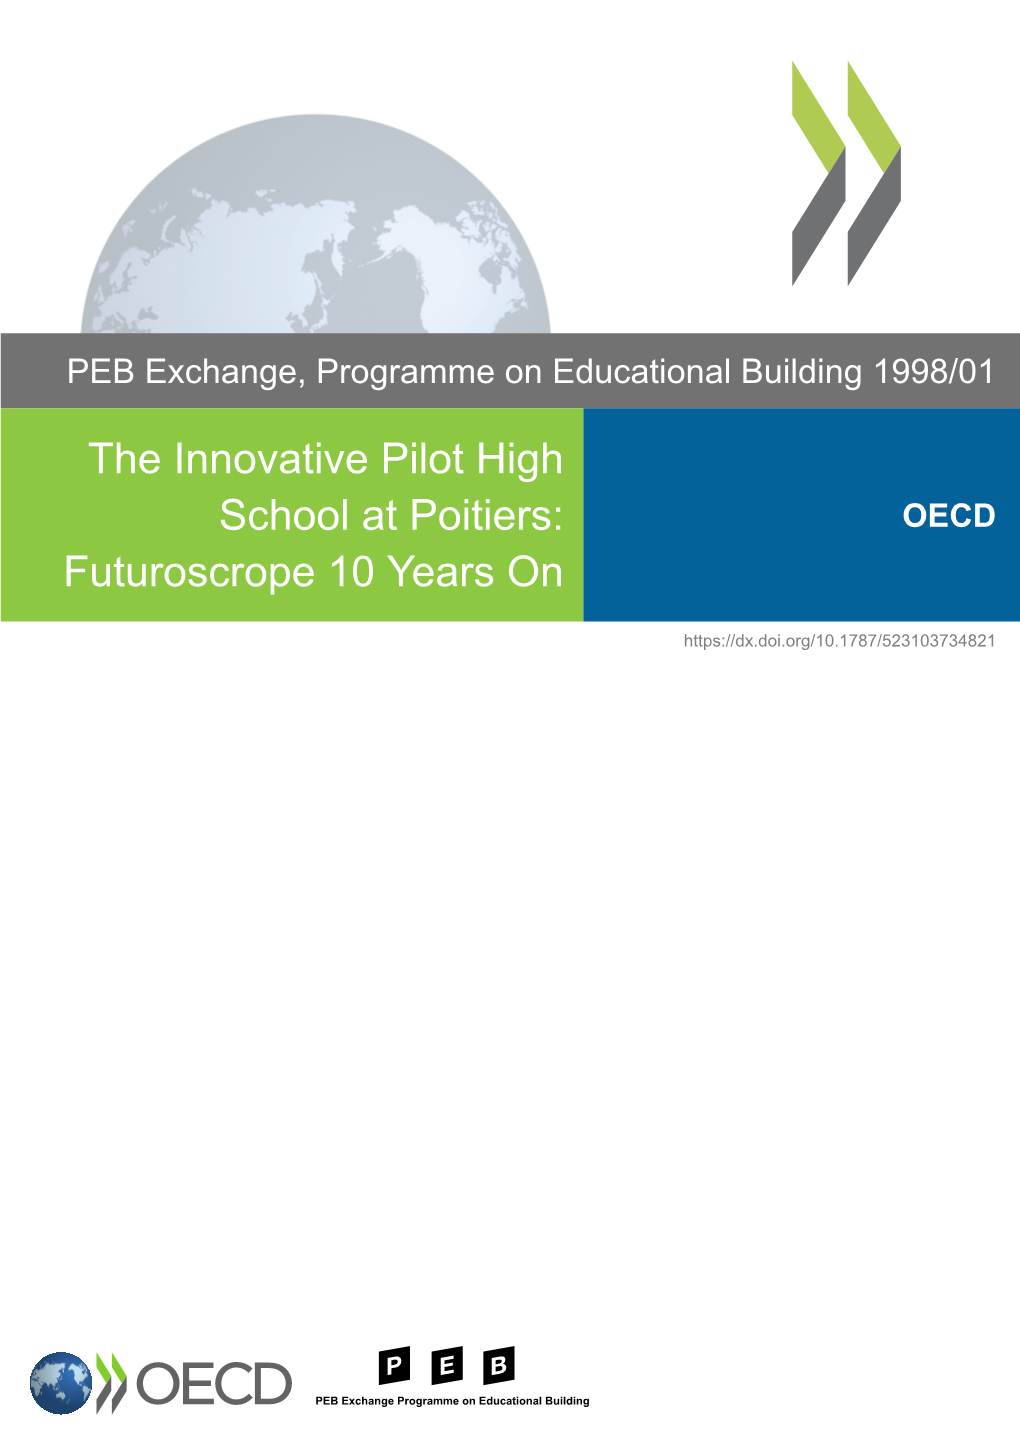 The Innovative Pilot High School at Poitiers: OECD Futuroscrope 10 Years On